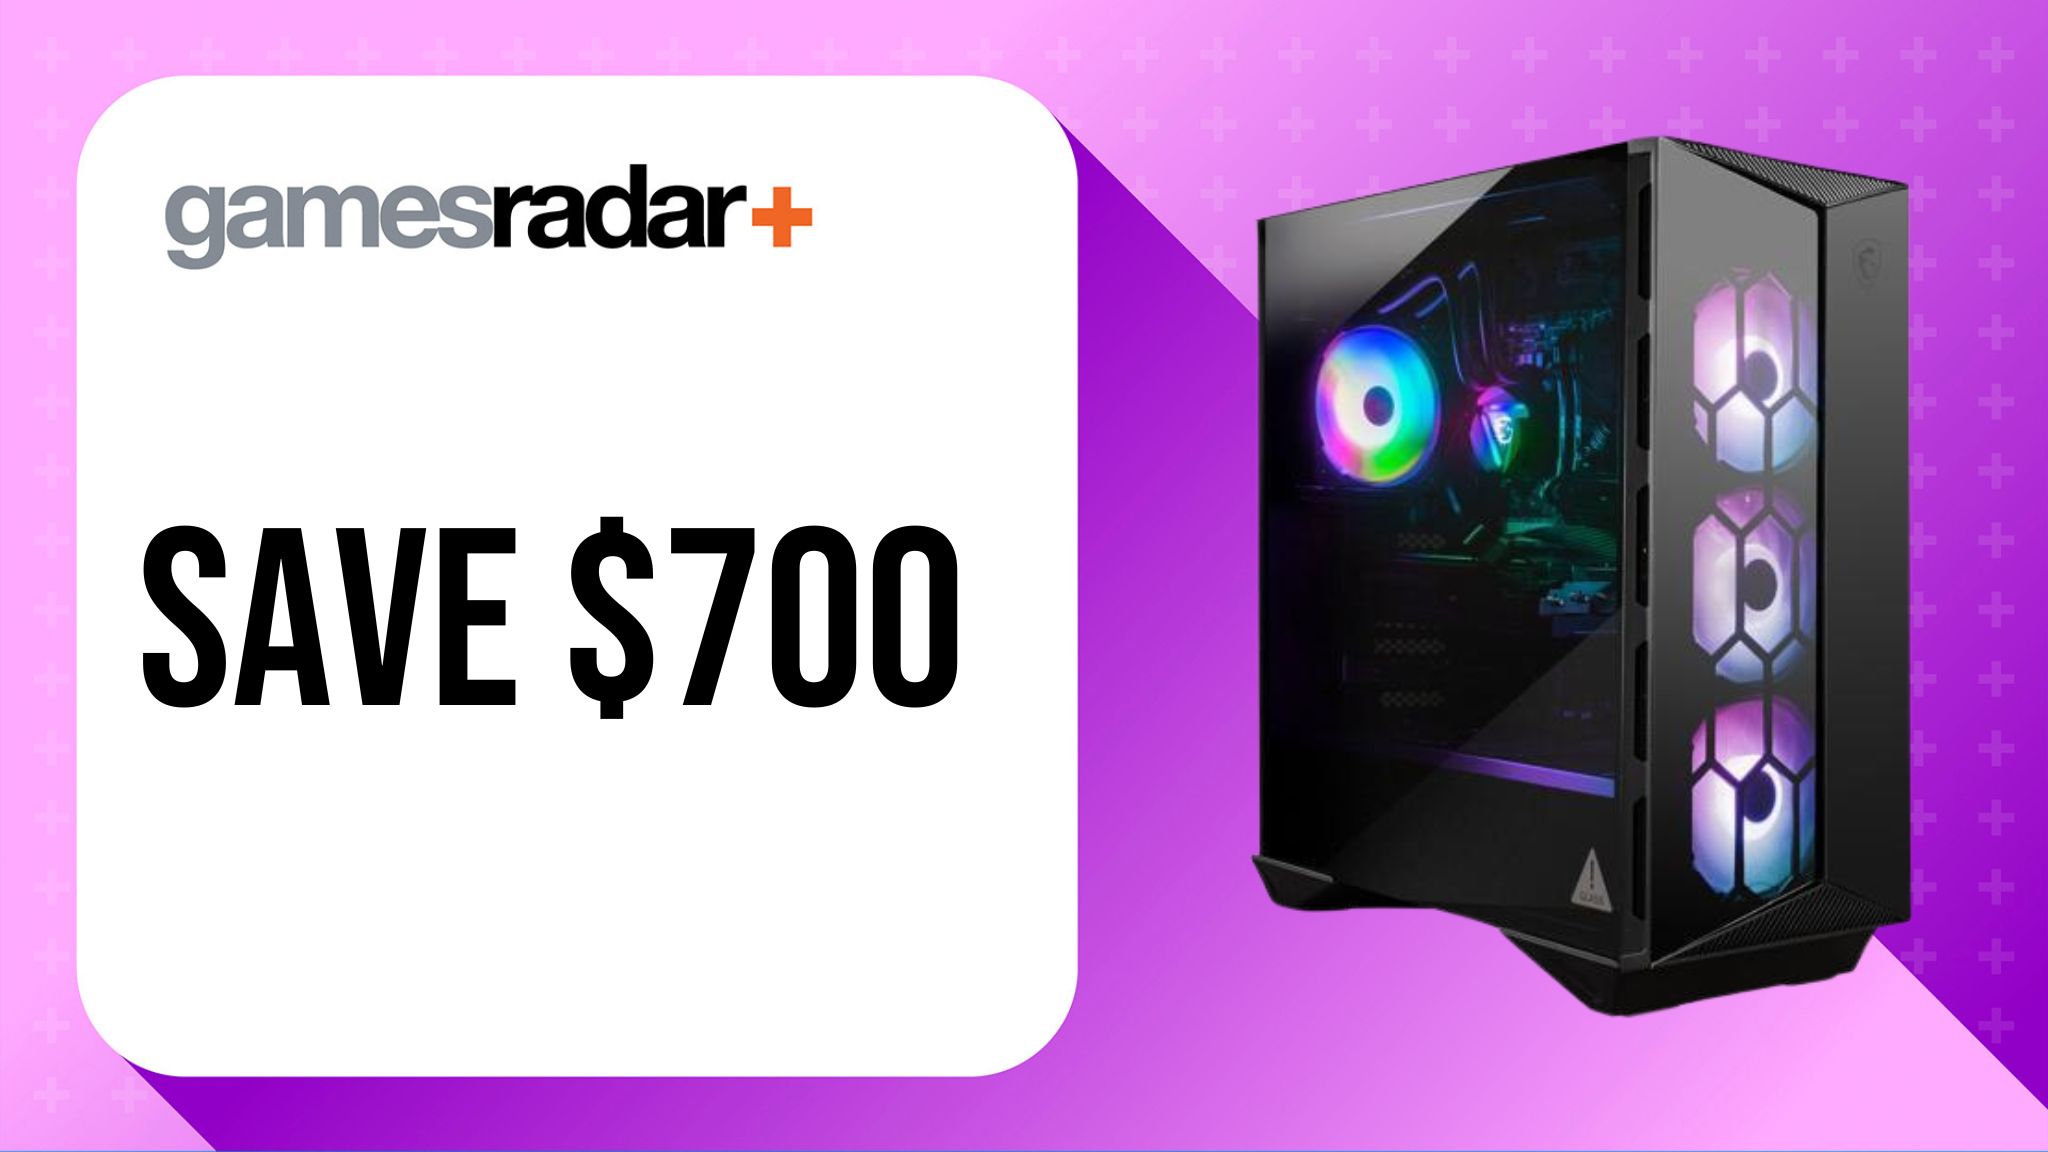 MSI Aegis R deal image with purple background saves $700